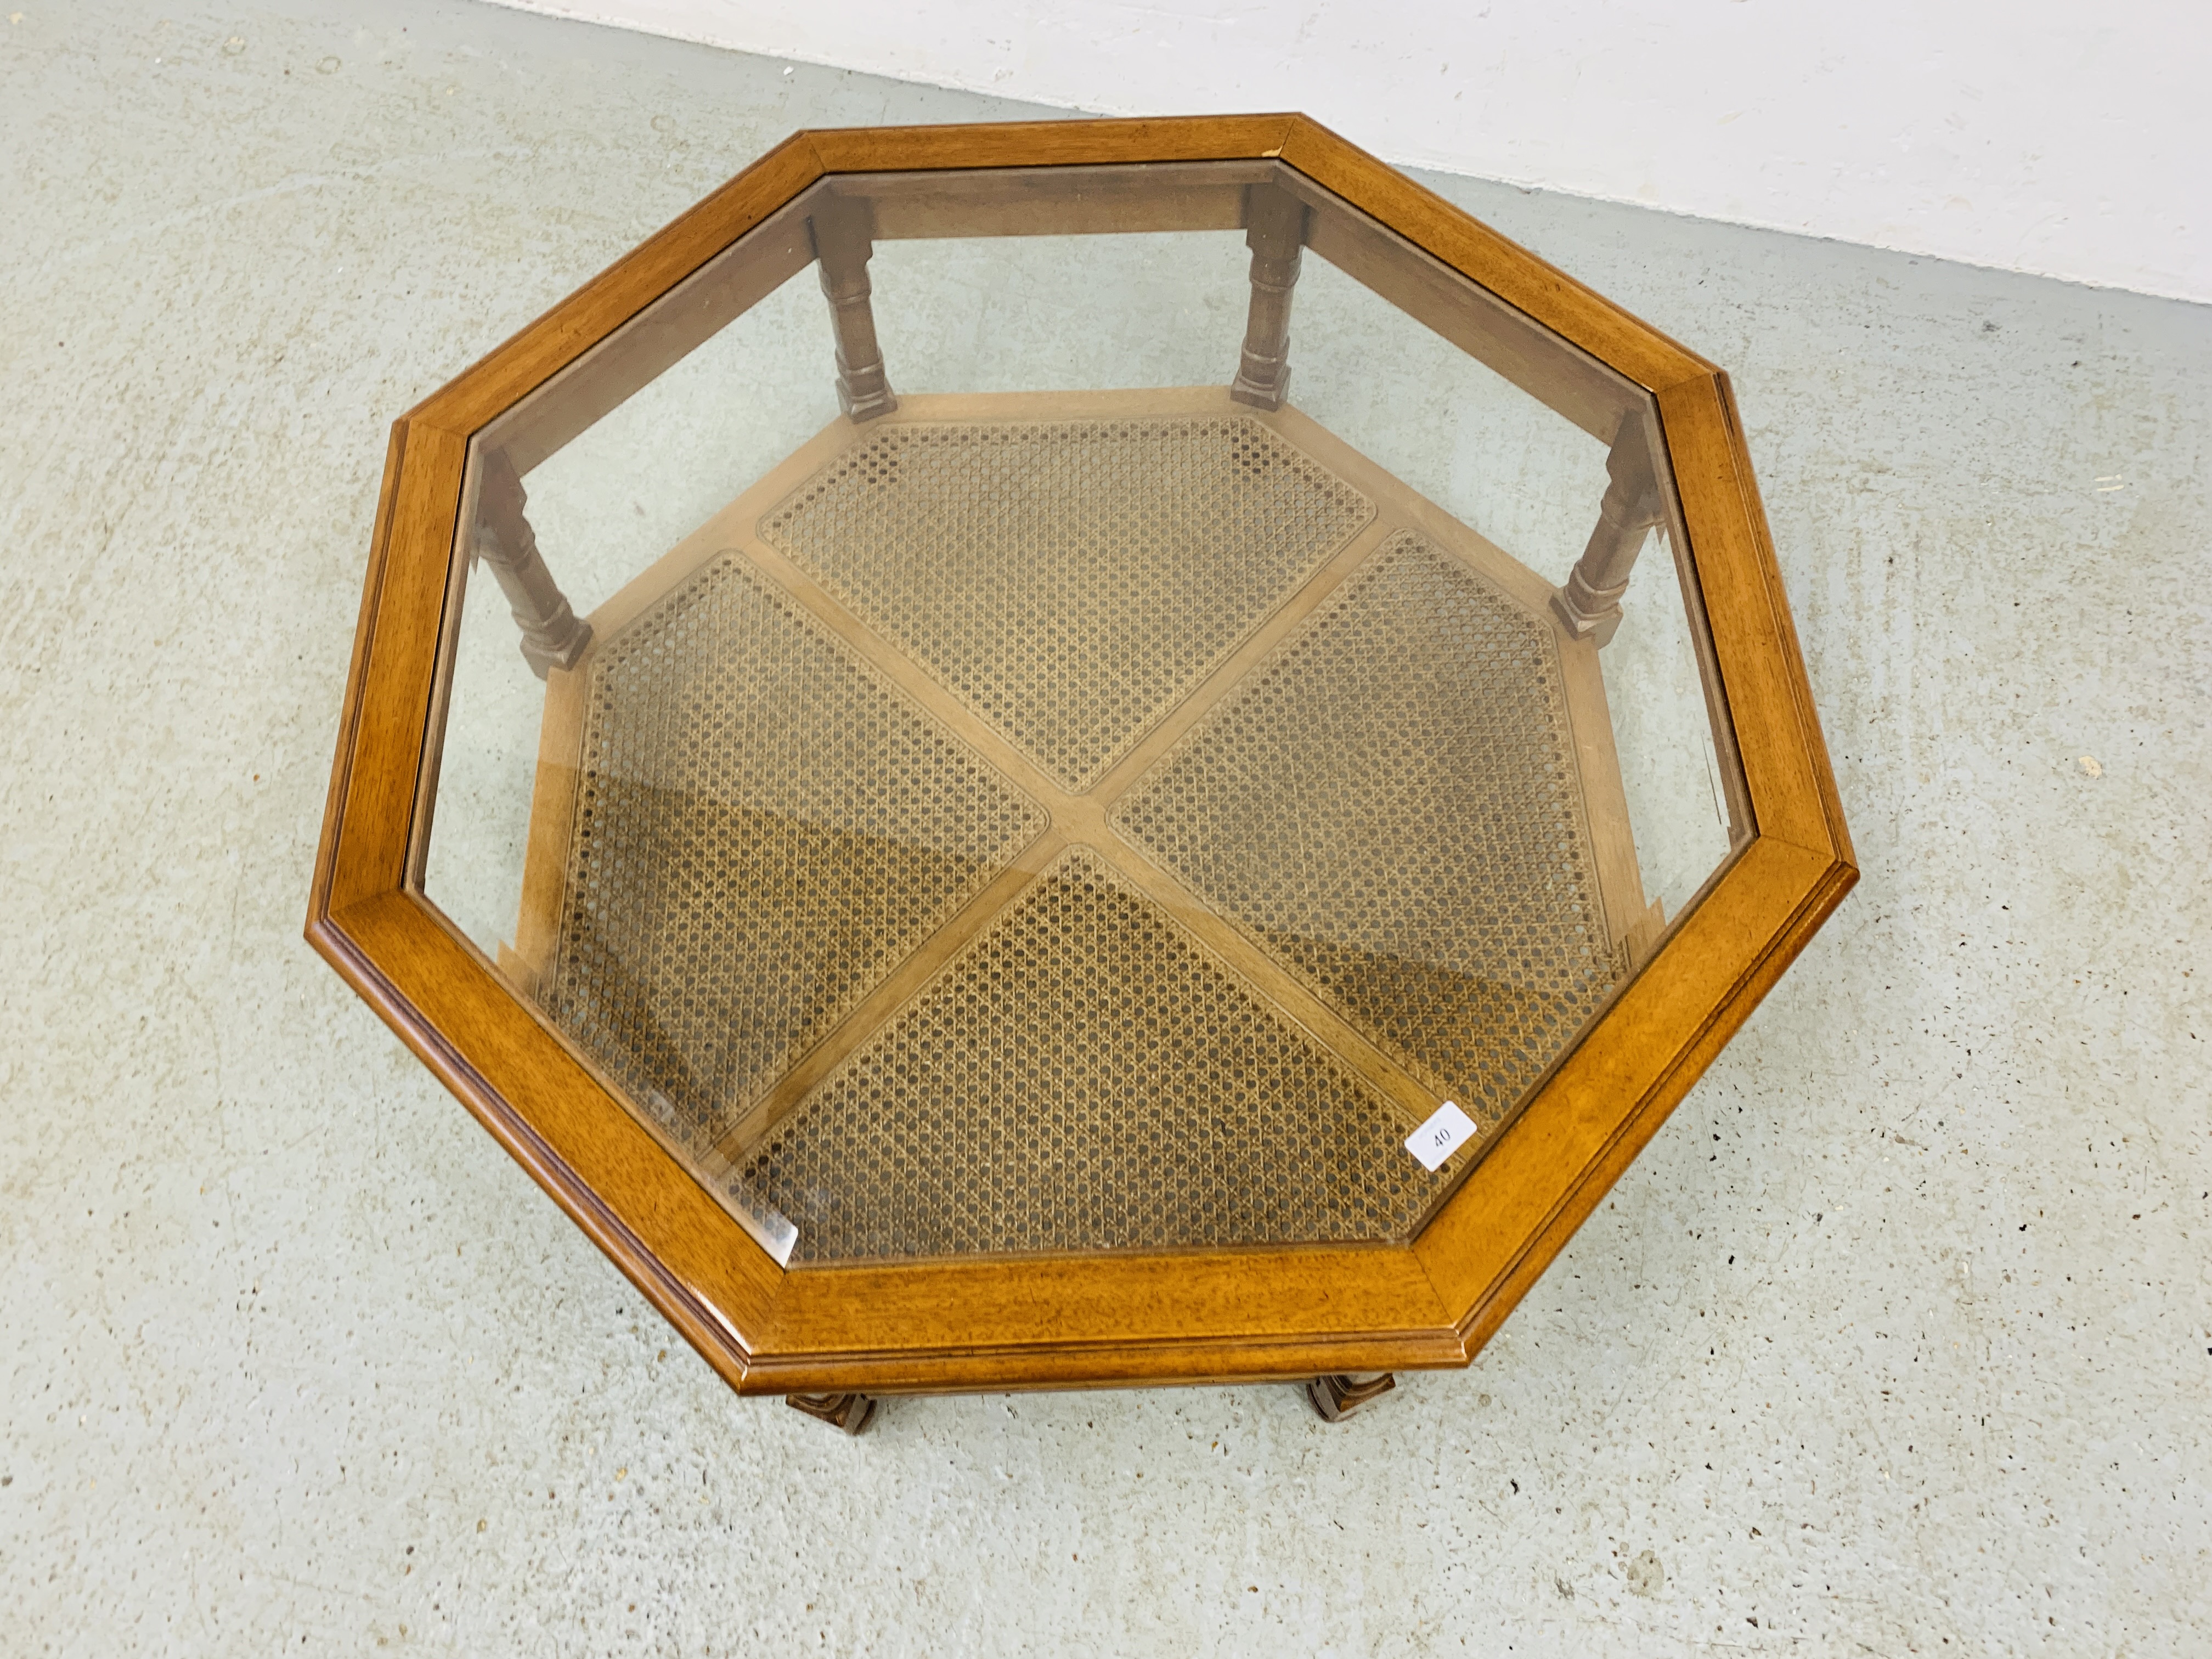 MODERN OCTAGON GLAZED COFFEE TABLE WITH RATTAN LOWER TIER - W 96CM. D 96CM. H 39CM. - Image 2 of 6